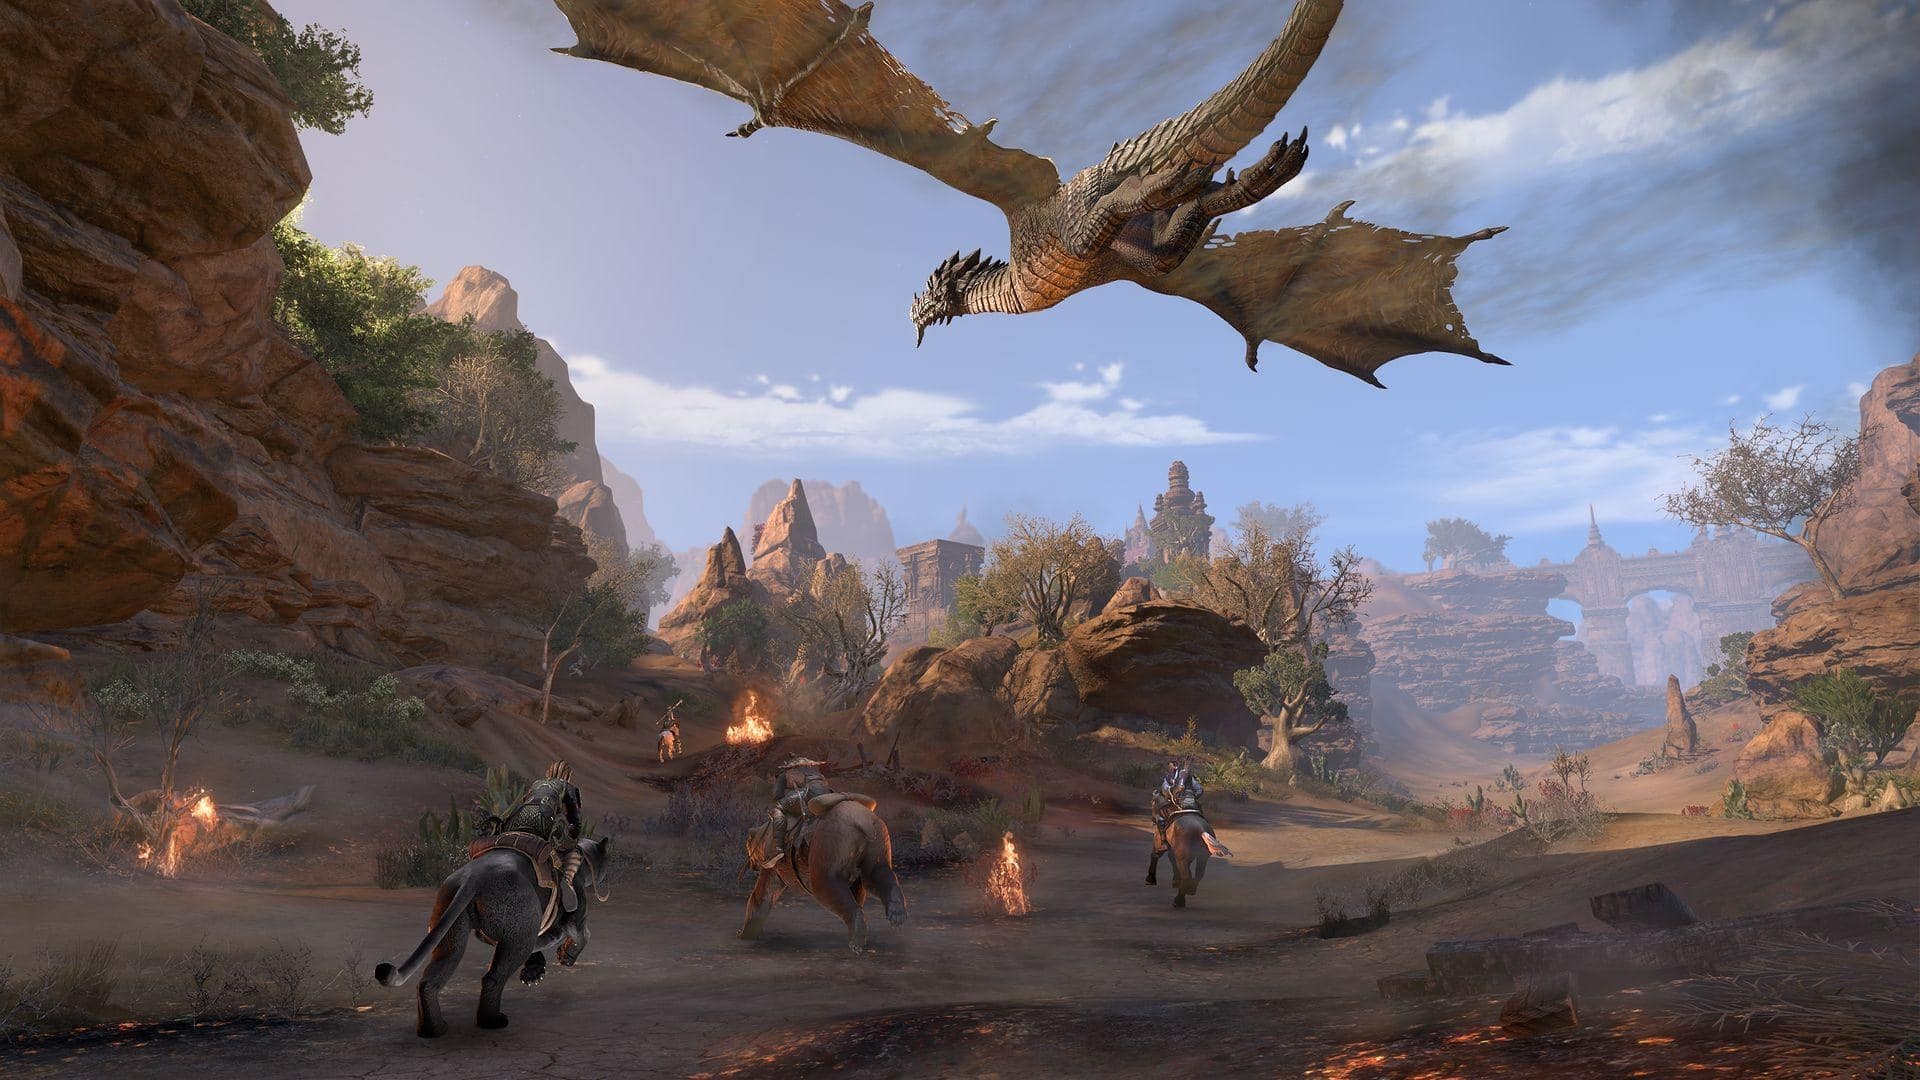 Best dragon games: The Elder Scrolls Online. Image shows a dragon flying overhead while characters riding different creatures ride below.